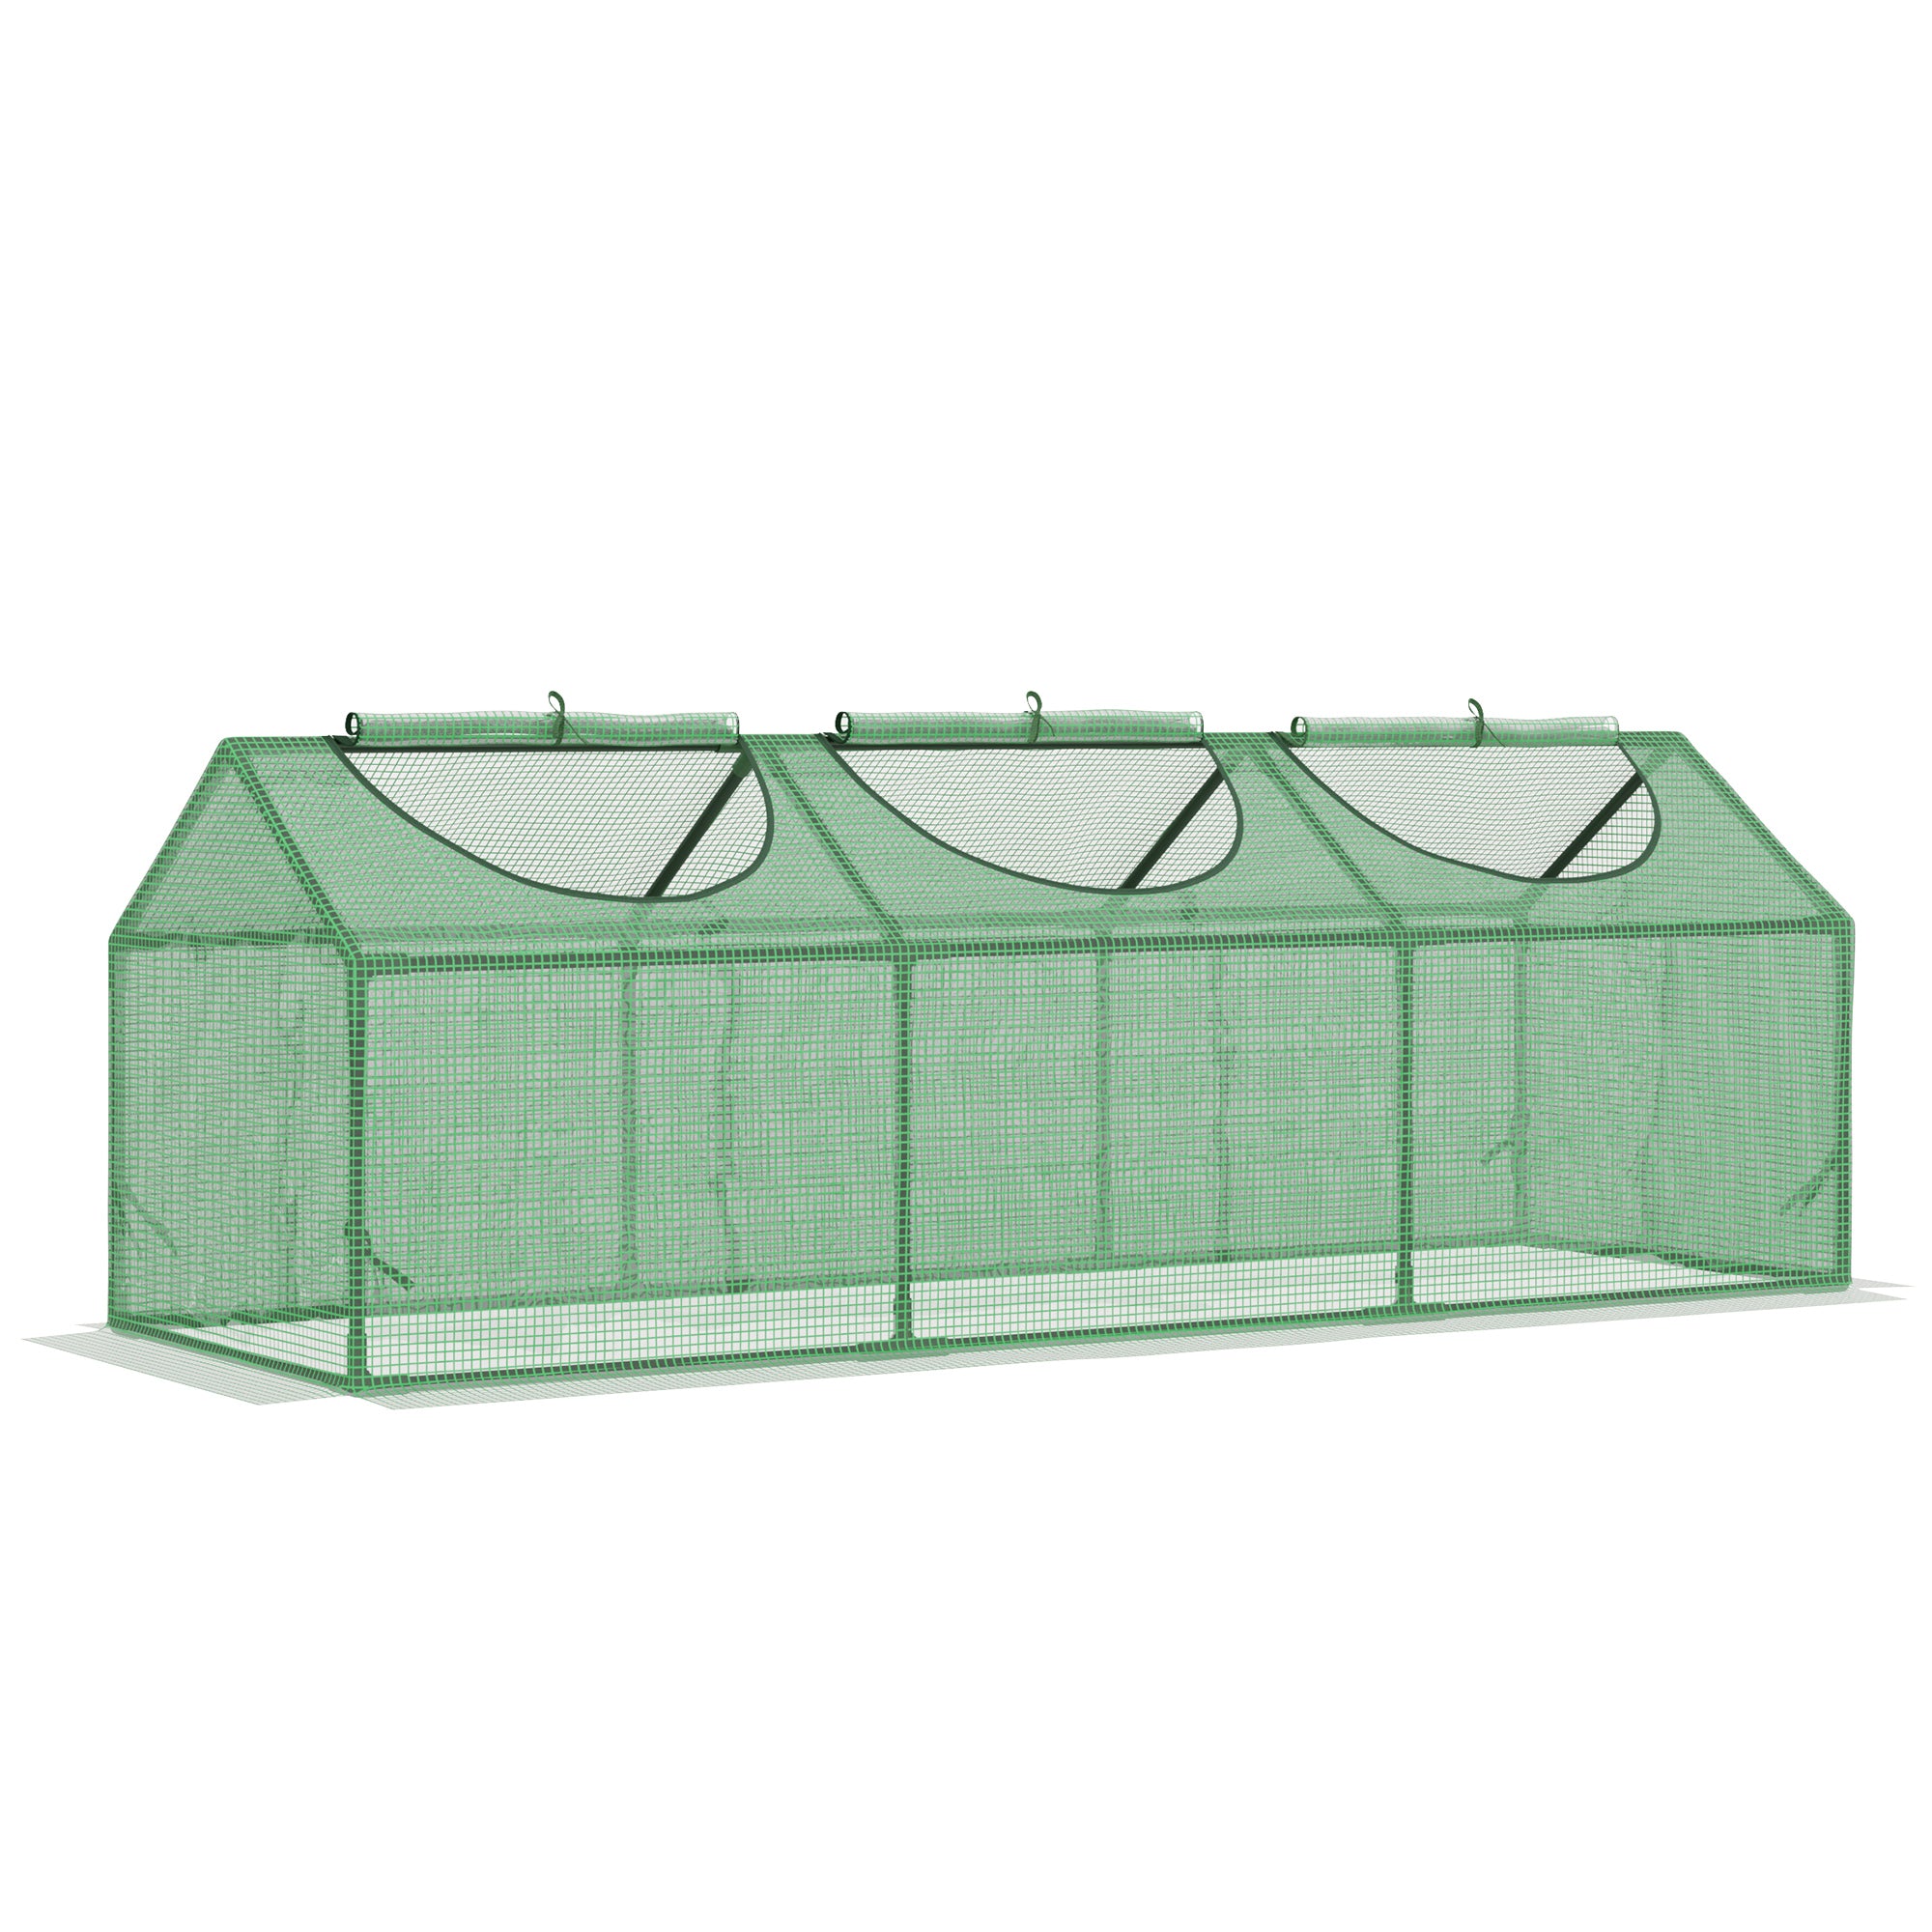 Outsunny Mini Greenhouse Small Plant Grow House w/ 3 Windows for Outdoor  | TJ Hughes Blue